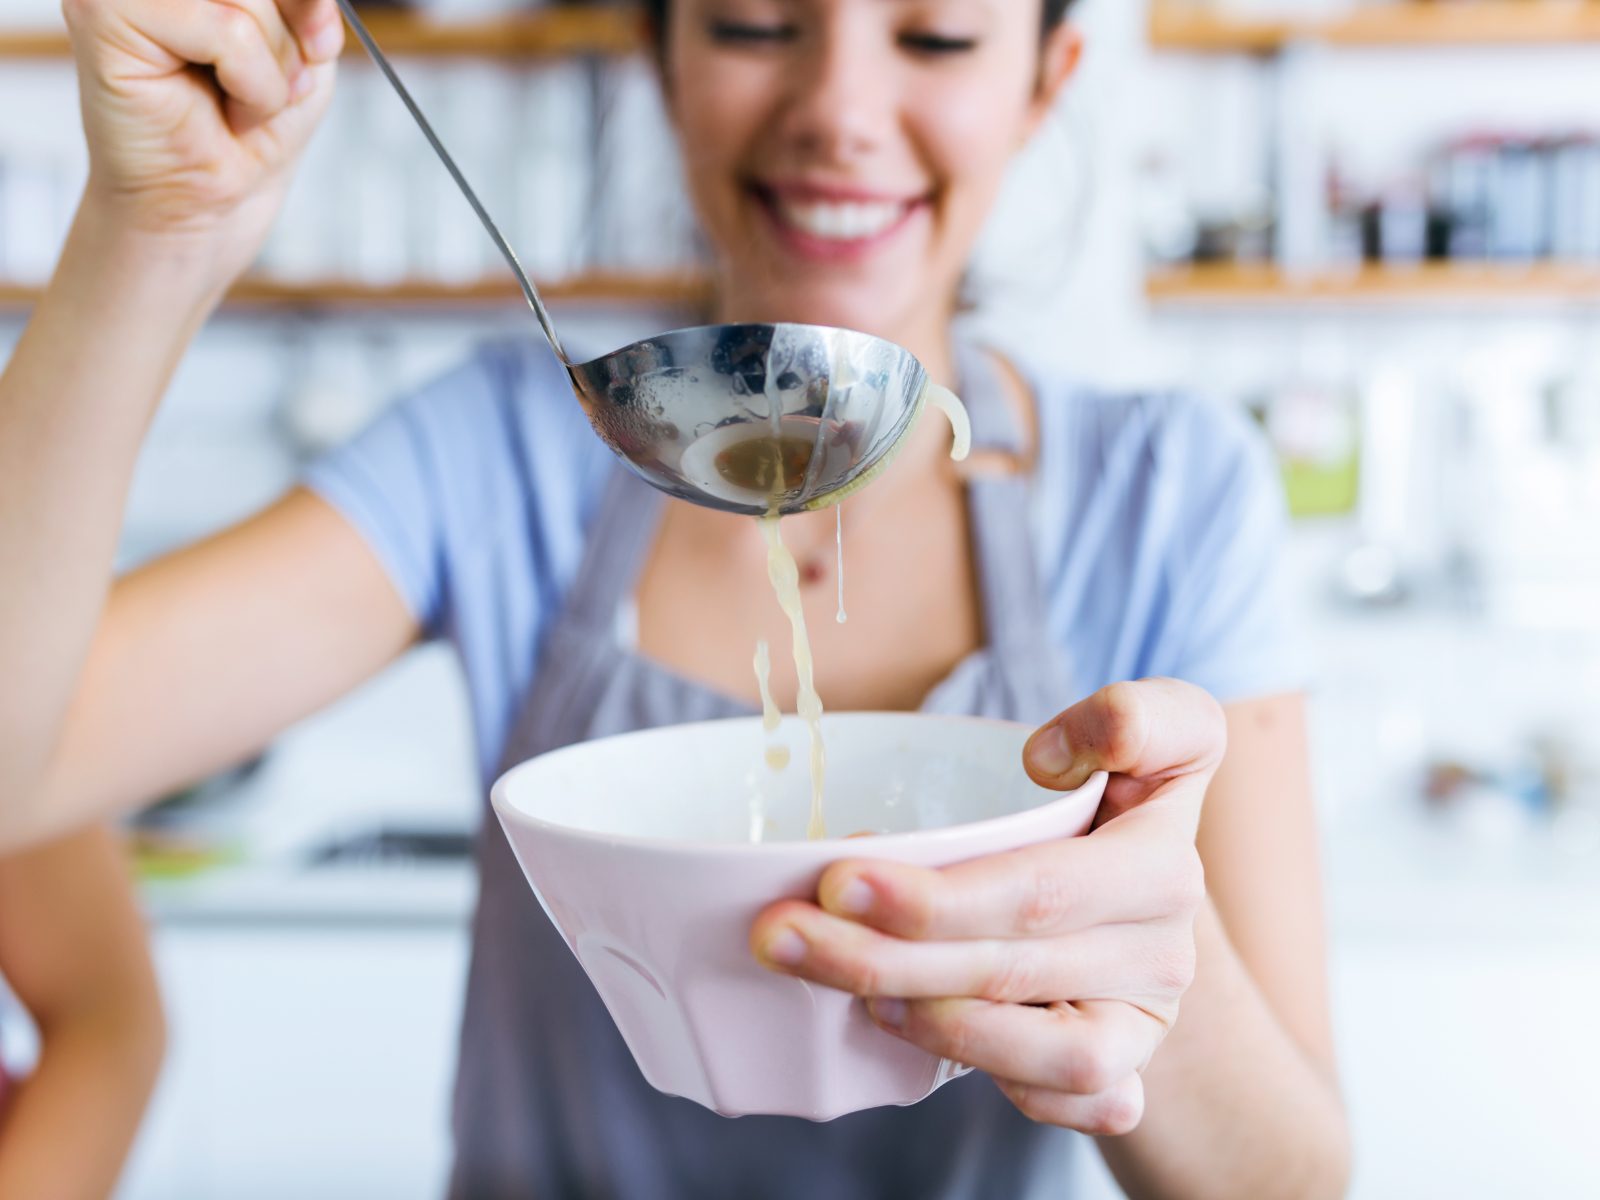 woman serving herself broth with a ladle into a bowl